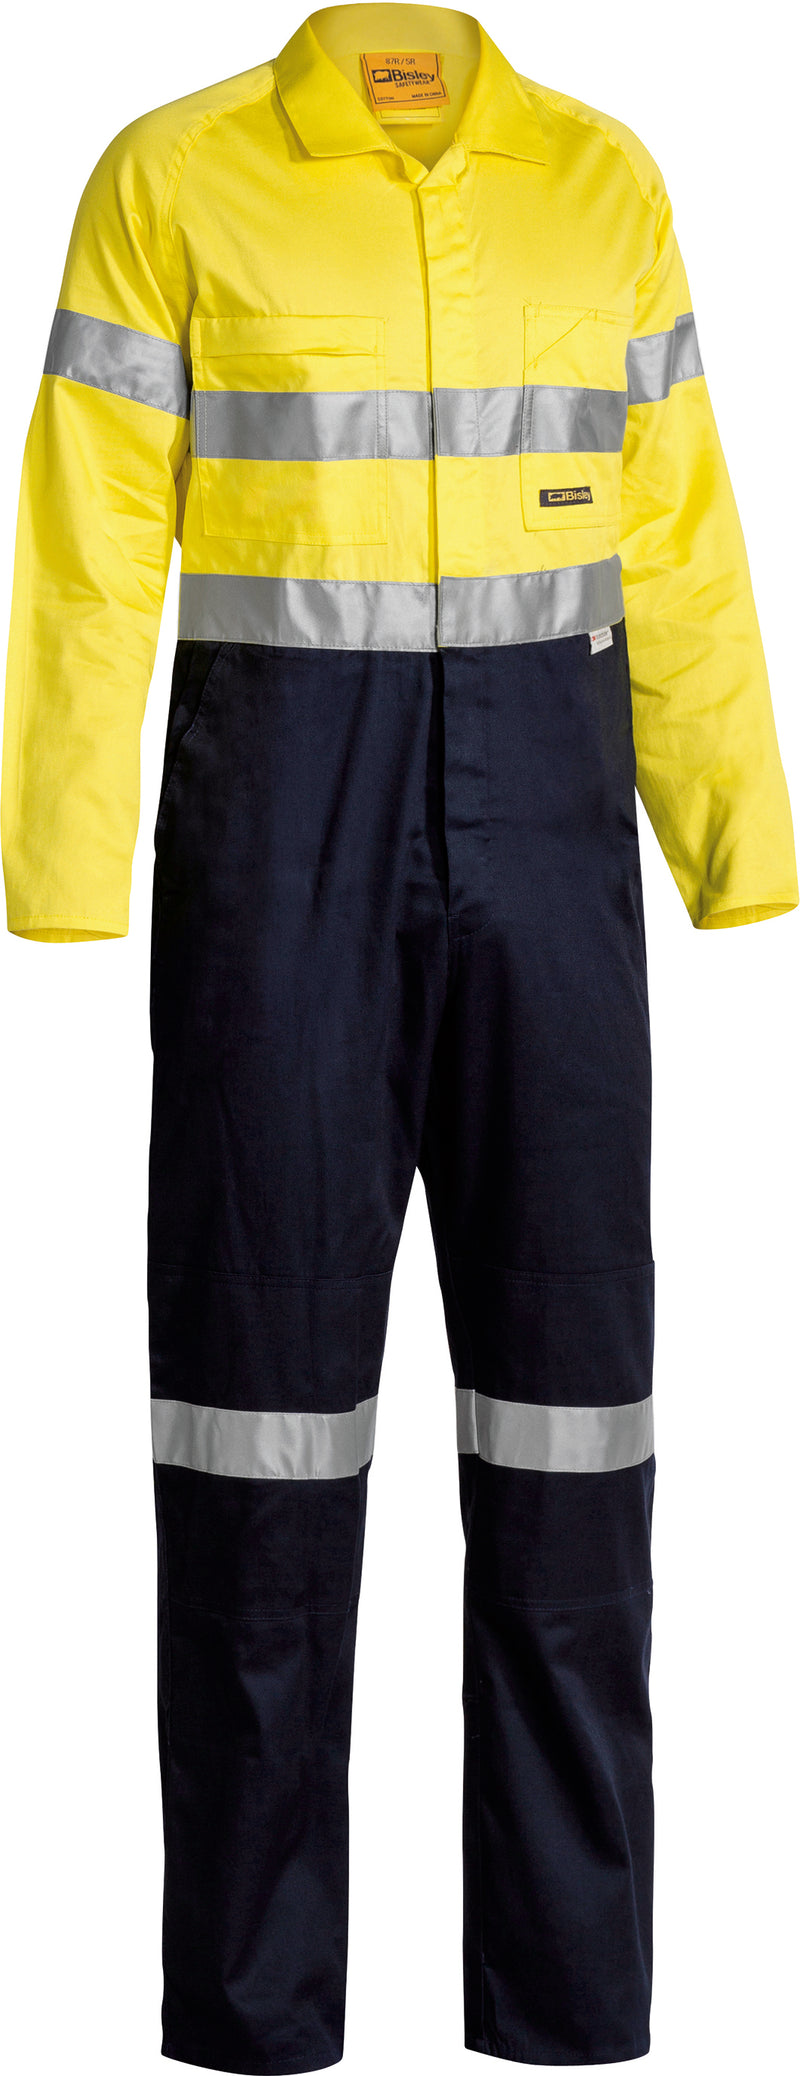 Load image into Gallery viewer, Wholesale BC6719TW Bisley 2 Tone Hi Vis Lightweight Overalls 3M Reflective Tape - Stout Printed or Blank
